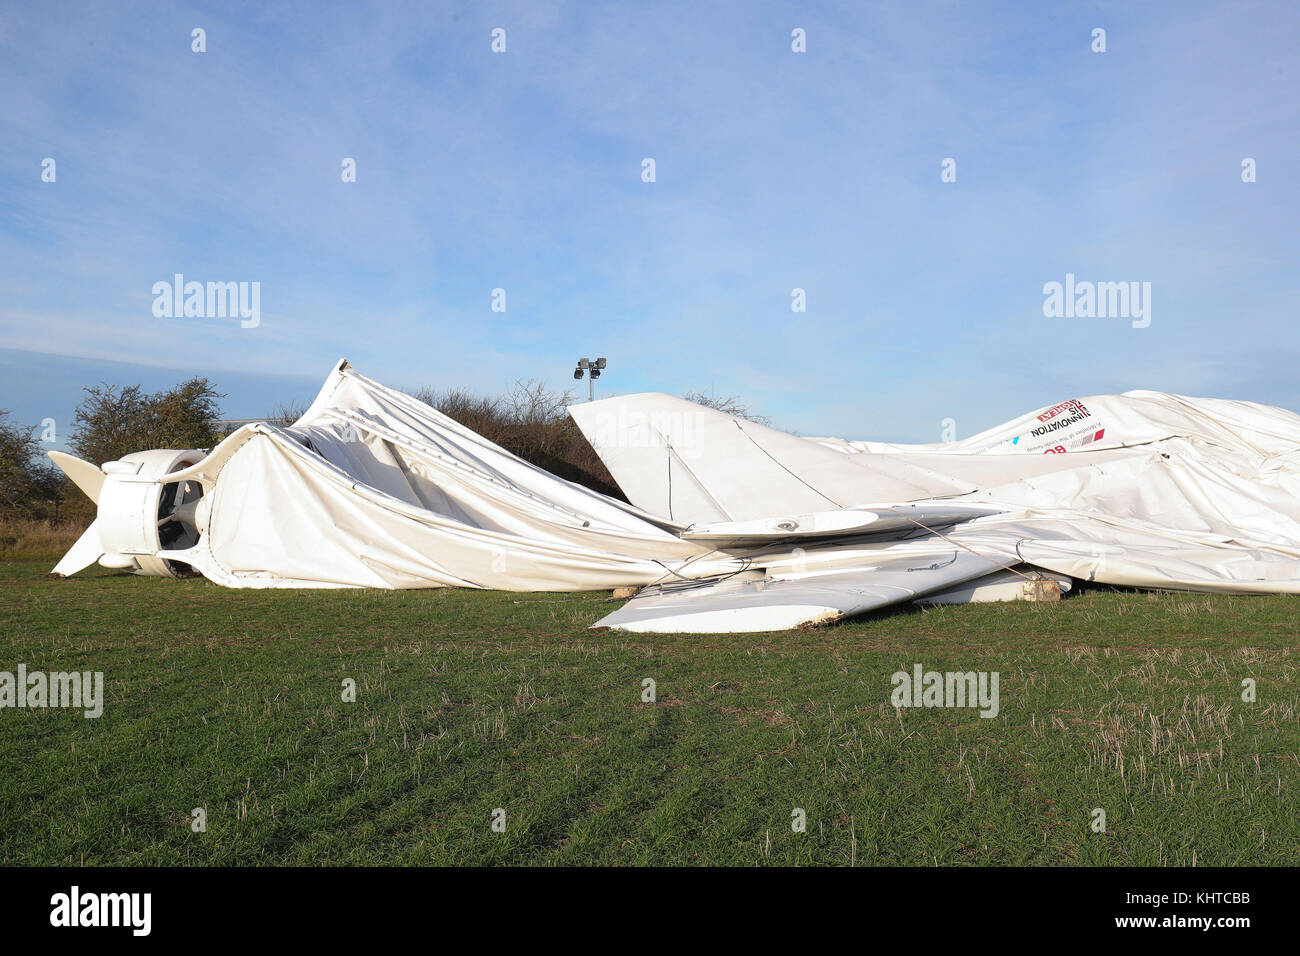 Airlander 10, the world's largest aircraft, lies on the ground at Cardington airfield in Bedfordshire, after the aircraft came loose from its moorings causing its hull to rip and deflate. Stock Photo